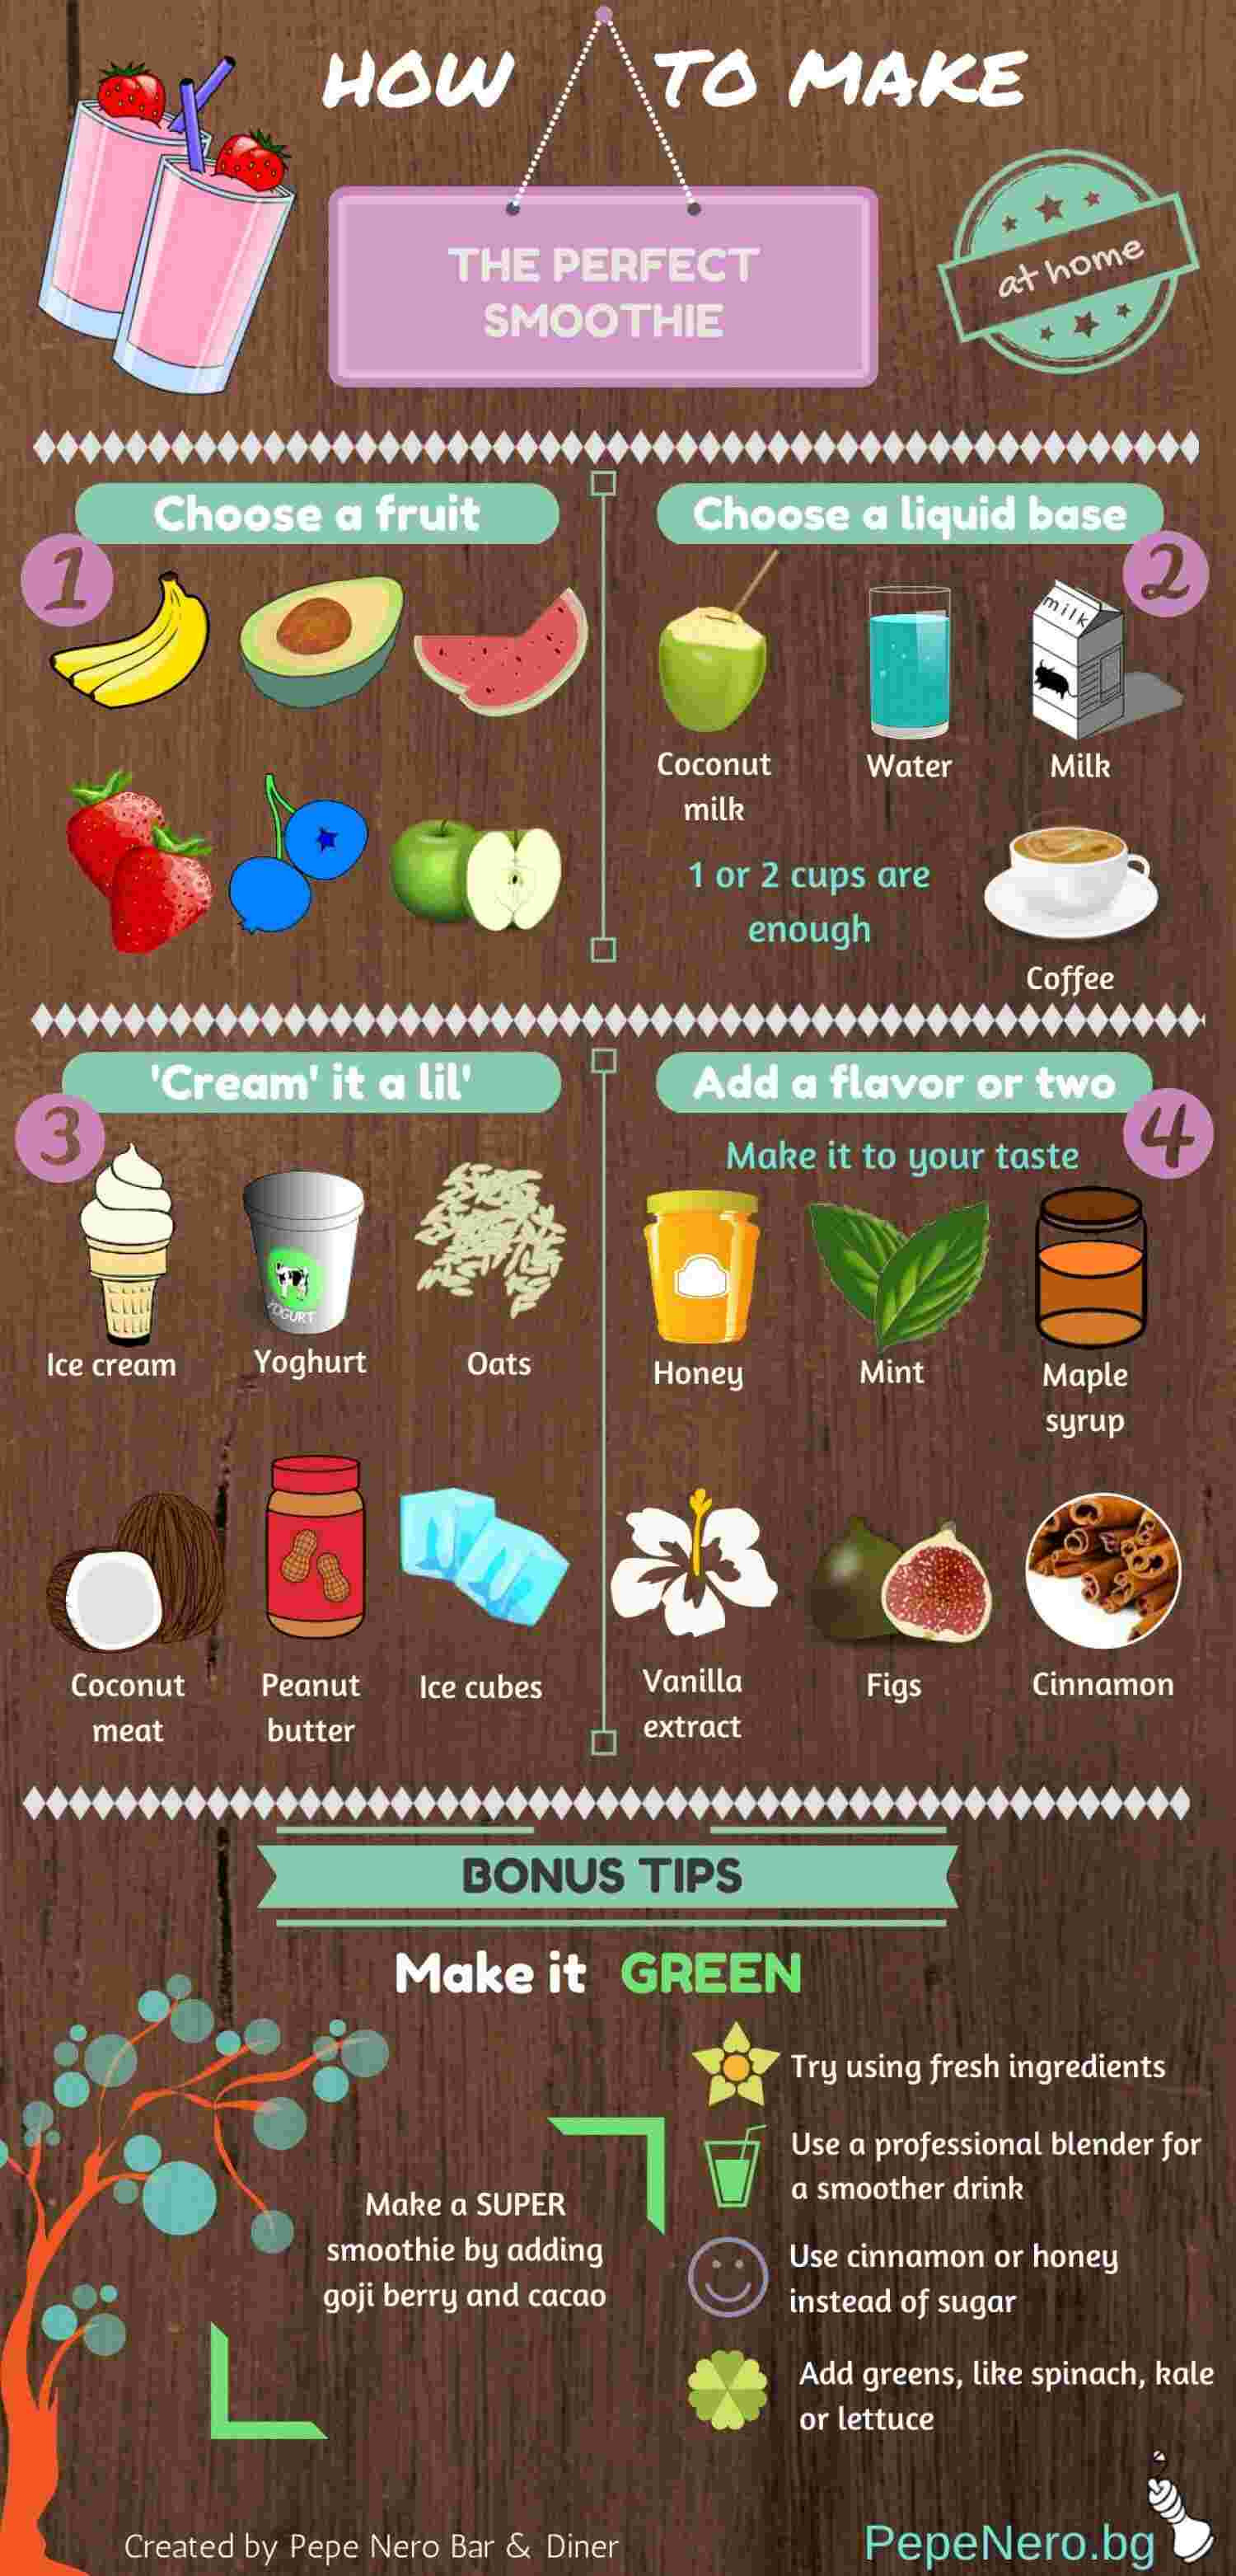 Guide to making a perfect smoothie.